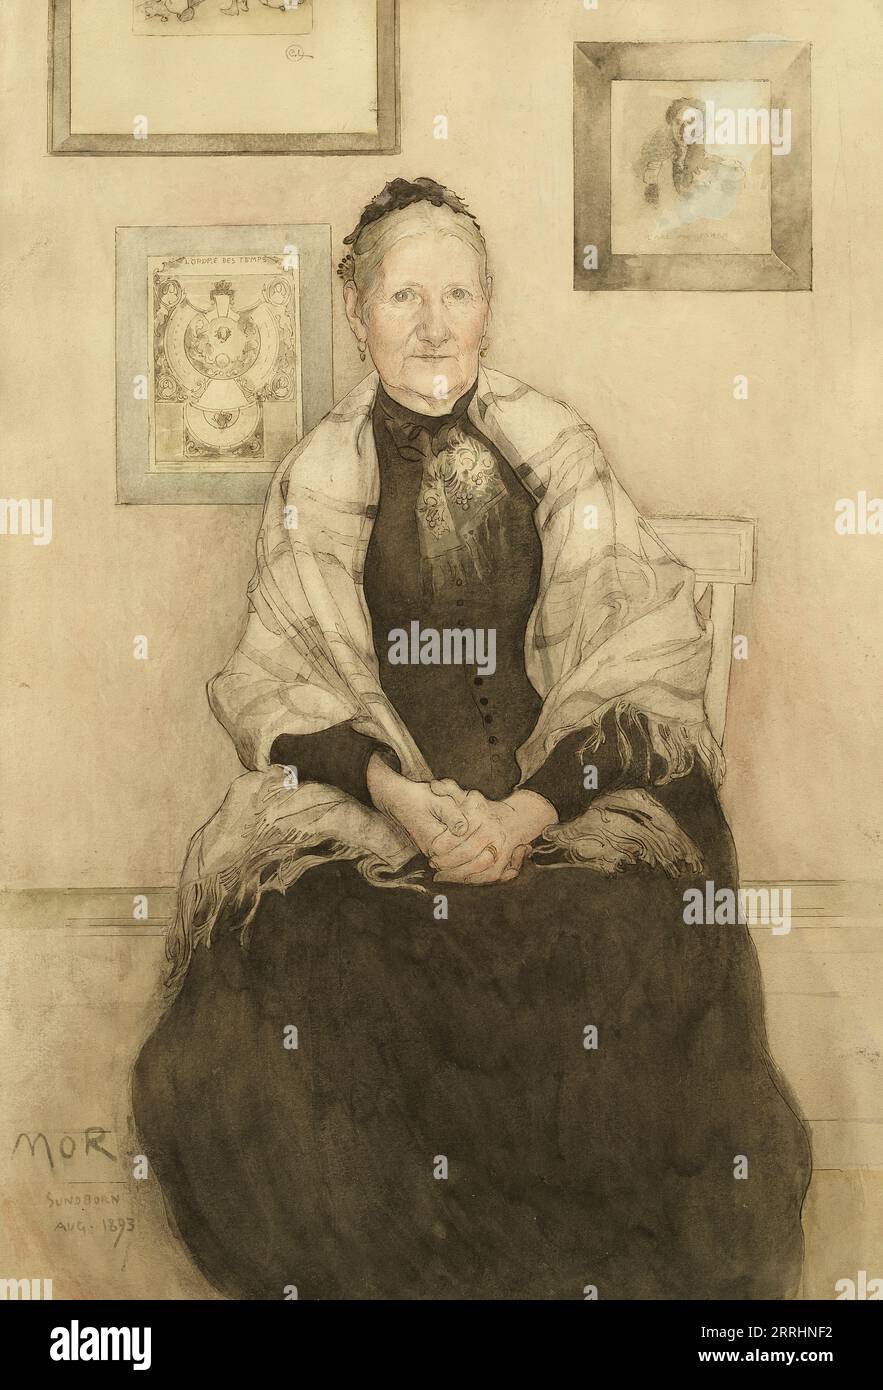 Mother, 1893. Additional Info: Carl Larsson was deeply attached to his mother, Johanna, but his difficult childhood had caused some tension in their relationship. In his autobiography, written many years after her death, he notes: &#x201c;But look at the small watercolour portrait of my mother in her old age, which is now hanging at the Nationalmuseum. Is she not blithe! She loves both her son and everyone else, that ugly, old, biddy. Whom I once thought so fair!&#x201d; Stock Photo